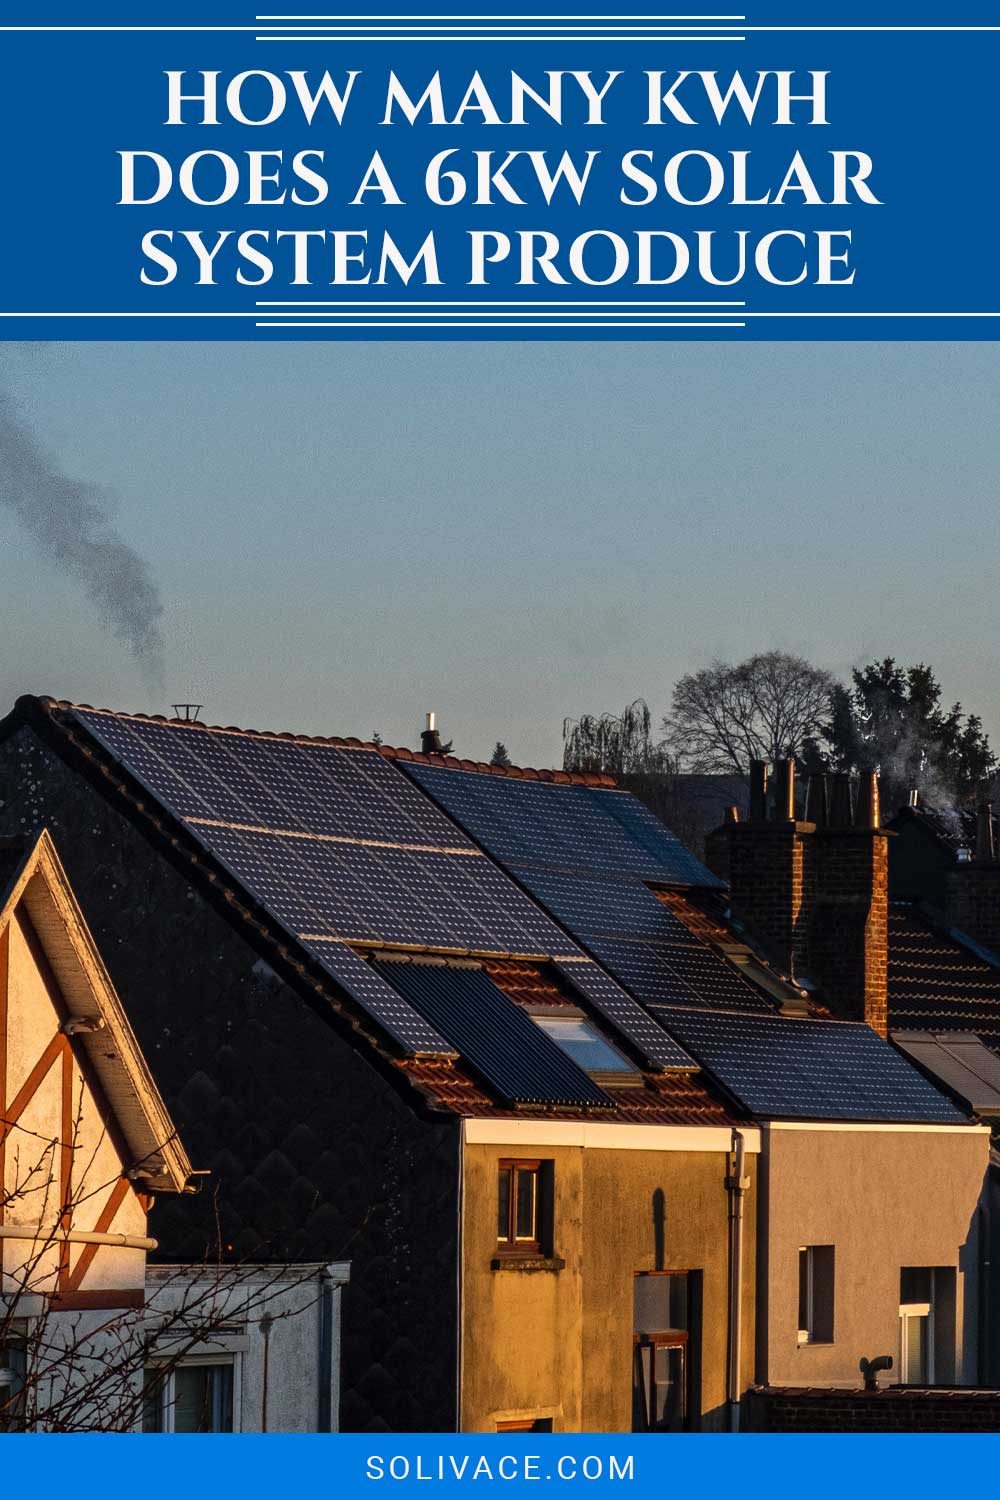 How Many Kwh Does A 6Kw Solar System Produce